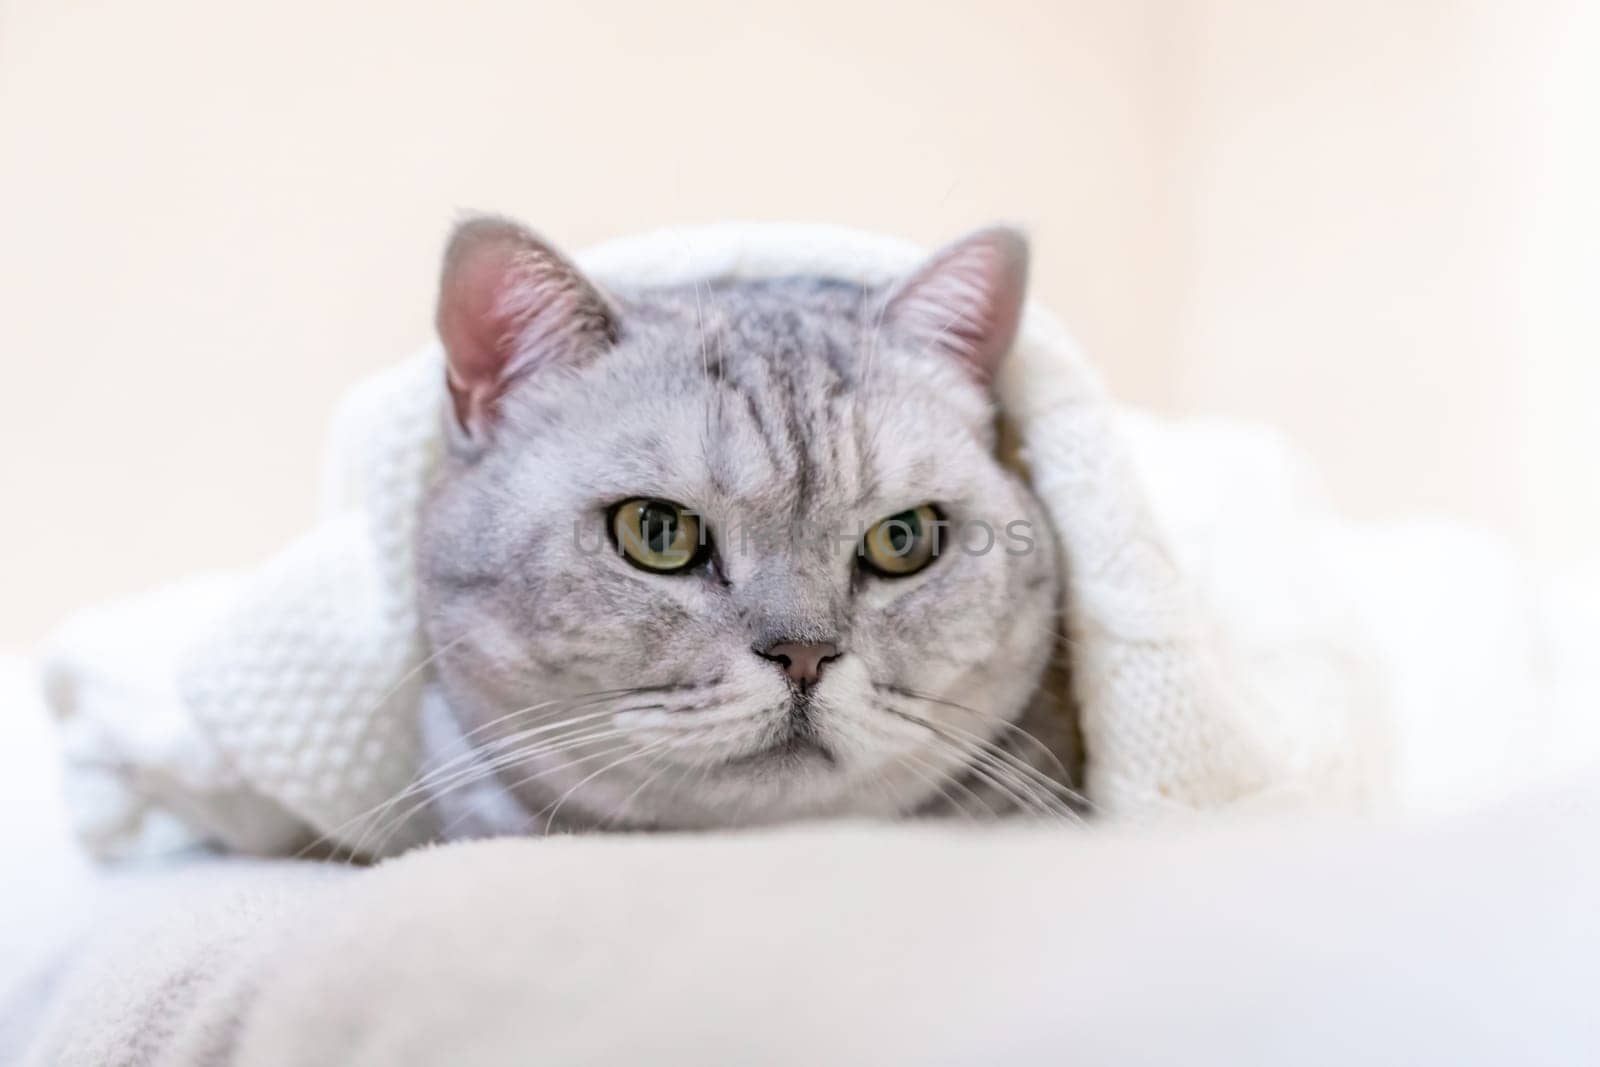 Relaxed Scottish cat wrapped in white blanket muzzle close up. Where: Unspecified location. Comfortable setting. Conveying cat's relaxation in cozy blanket